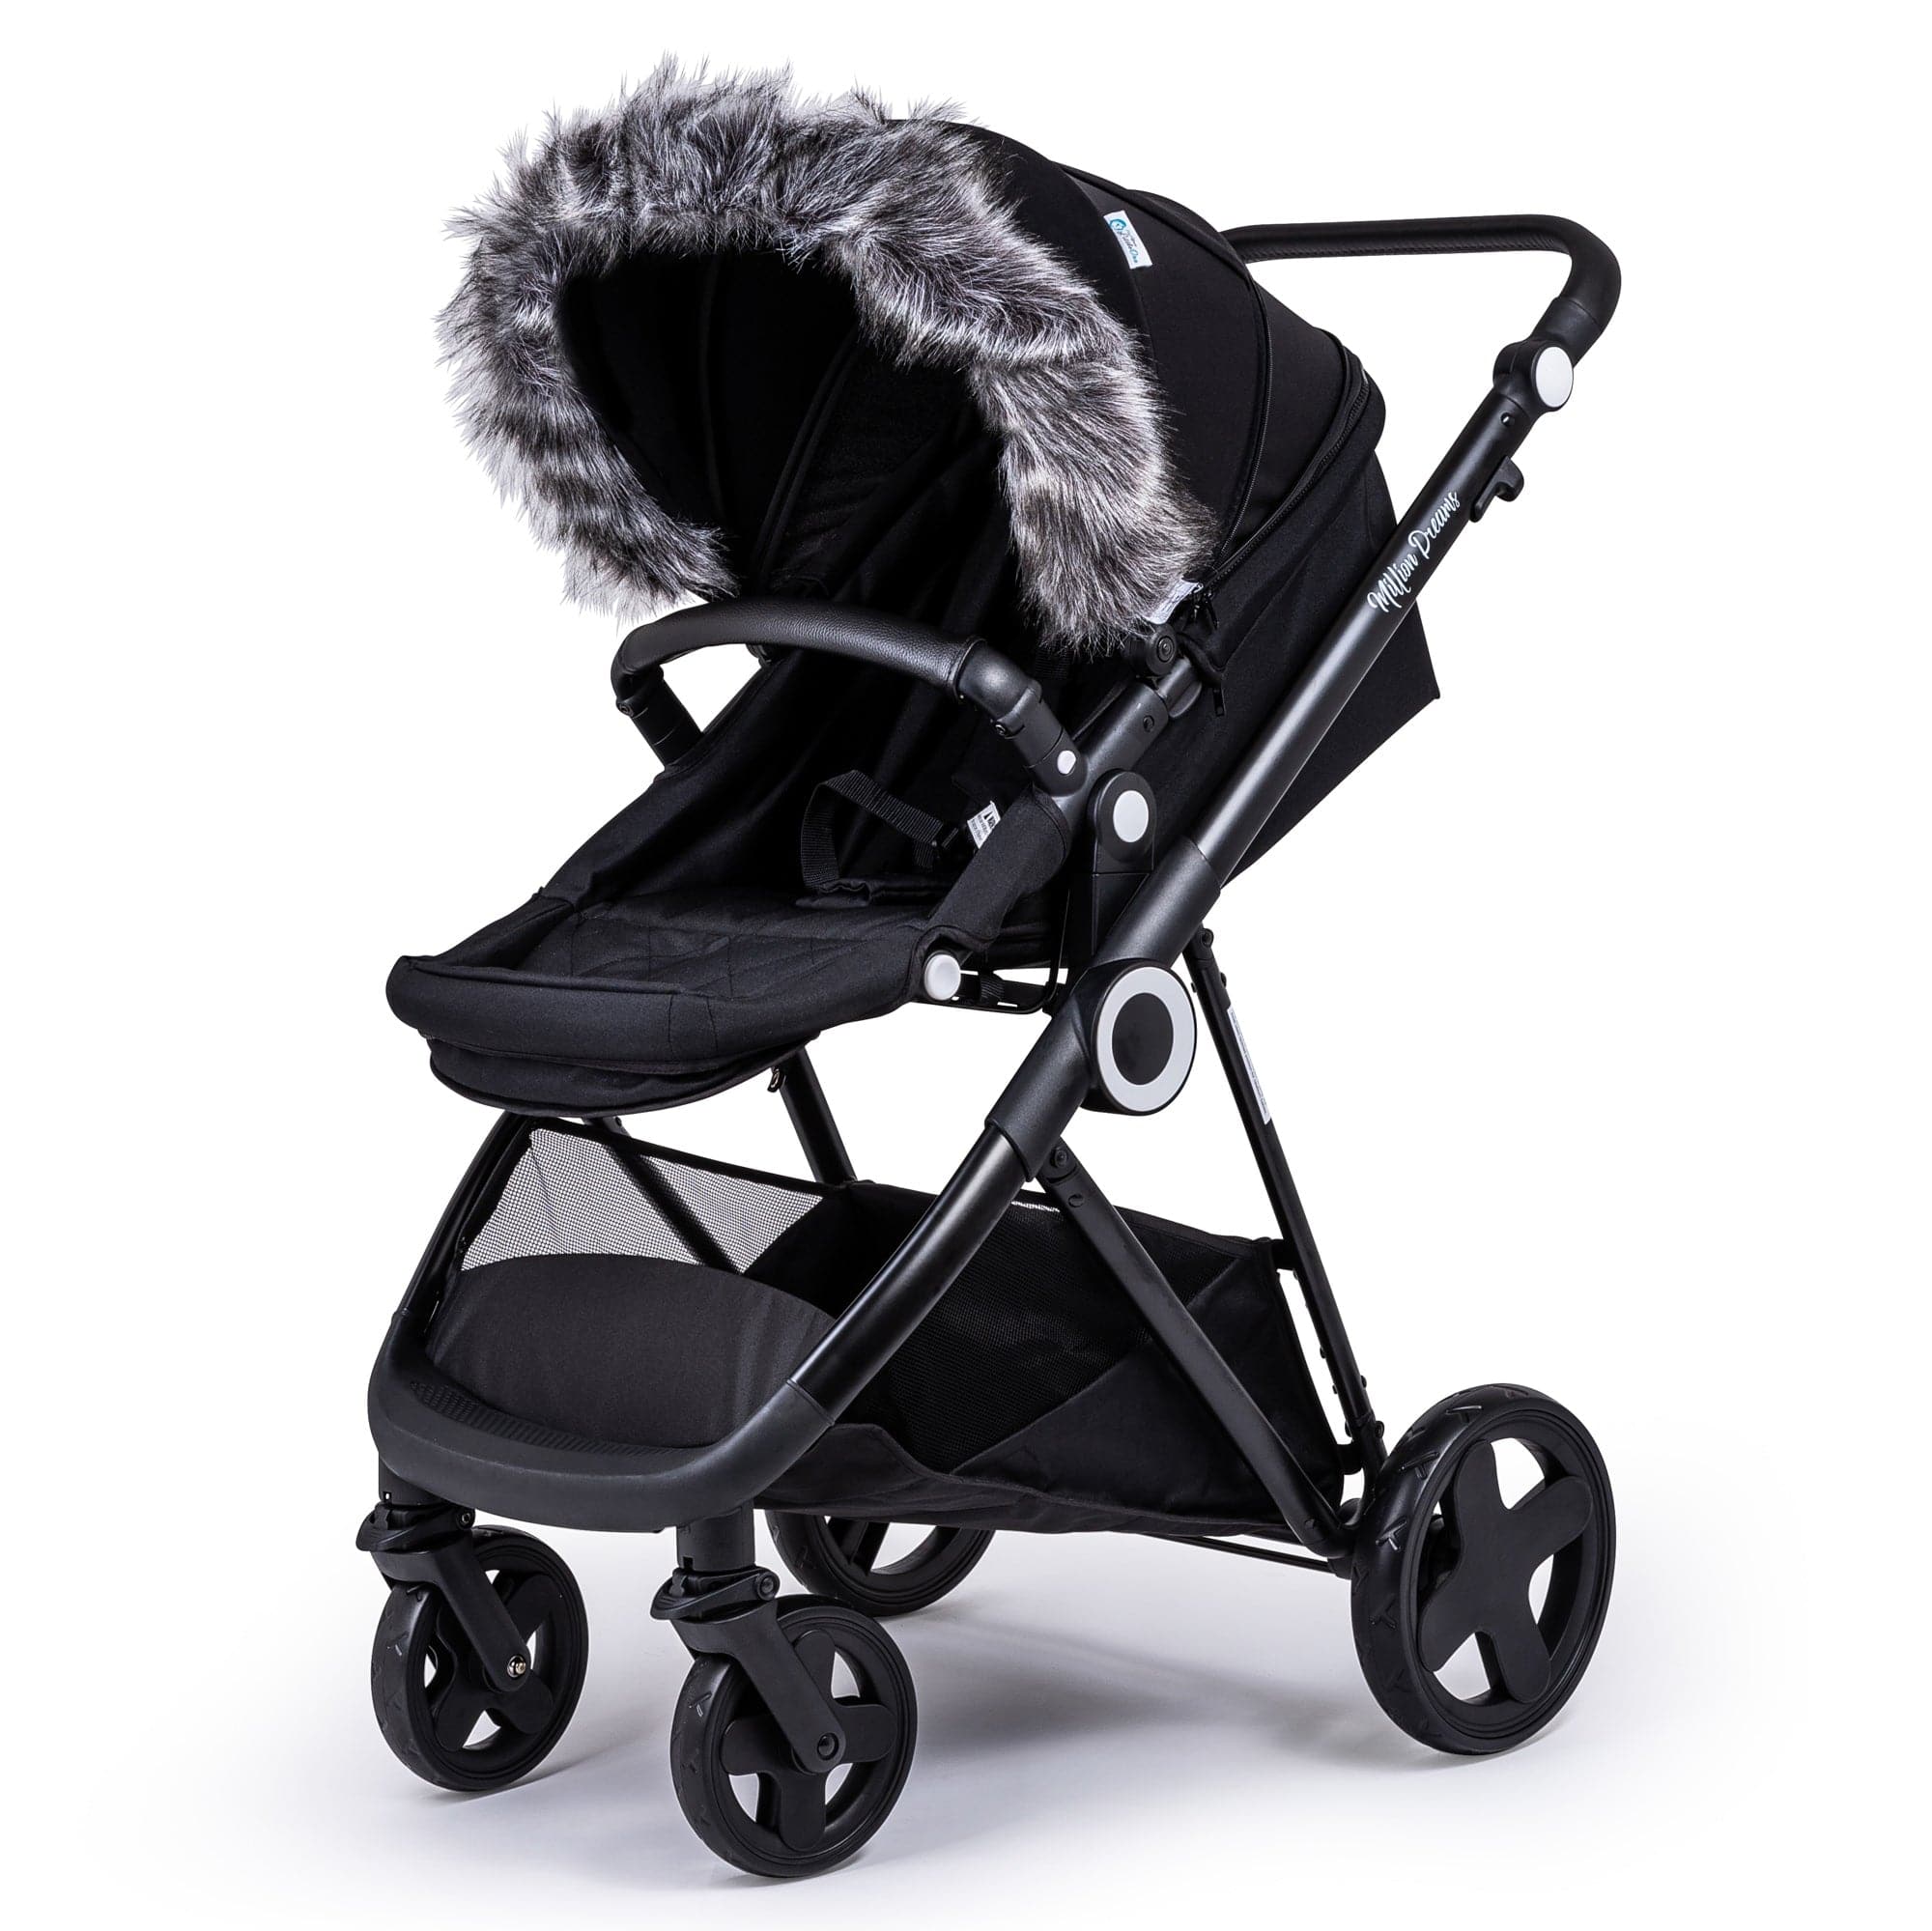 Pram Fur Hood Trim Attachment For Pushchair Compatible with Kiddy - Dark Grey / Fits All Models | For Your Little One